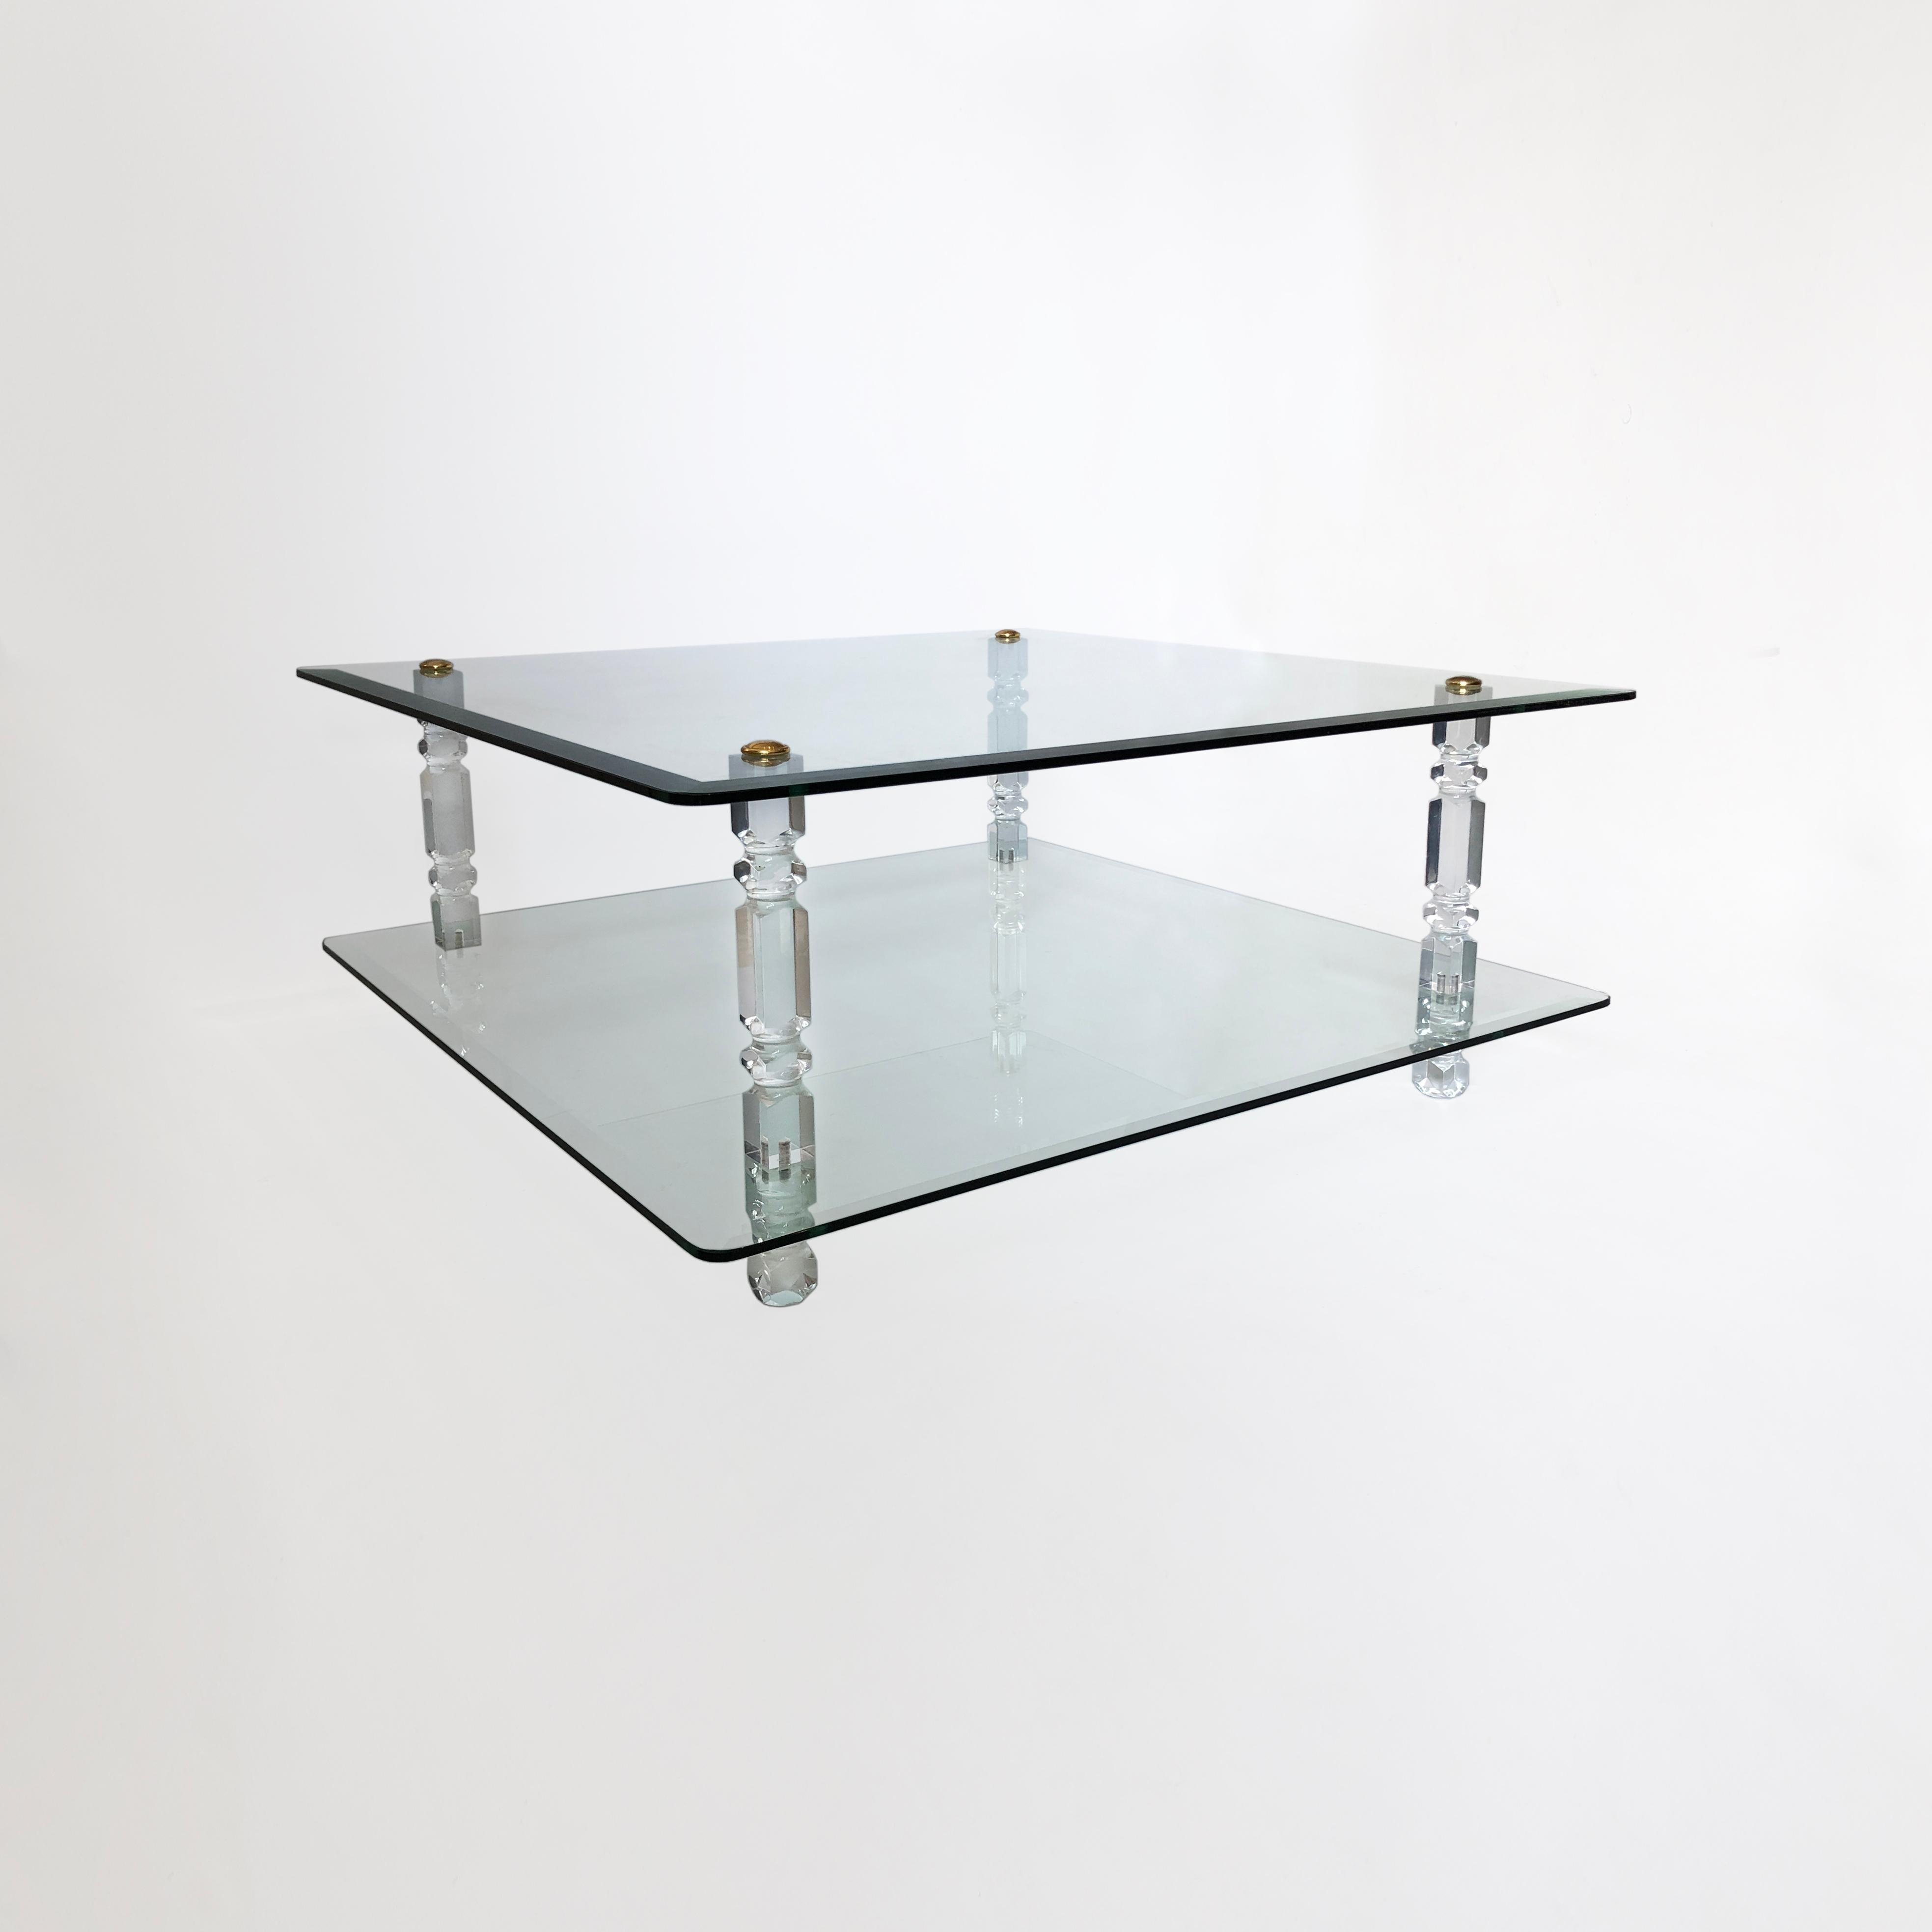 This large, two-tiered coffee table is composed of two square sheets of bevelled, reinforced glass, gently curved at the corners. These are held in place by four ornate lucite columns, with a brass disc screw at the top to complete the piece. The